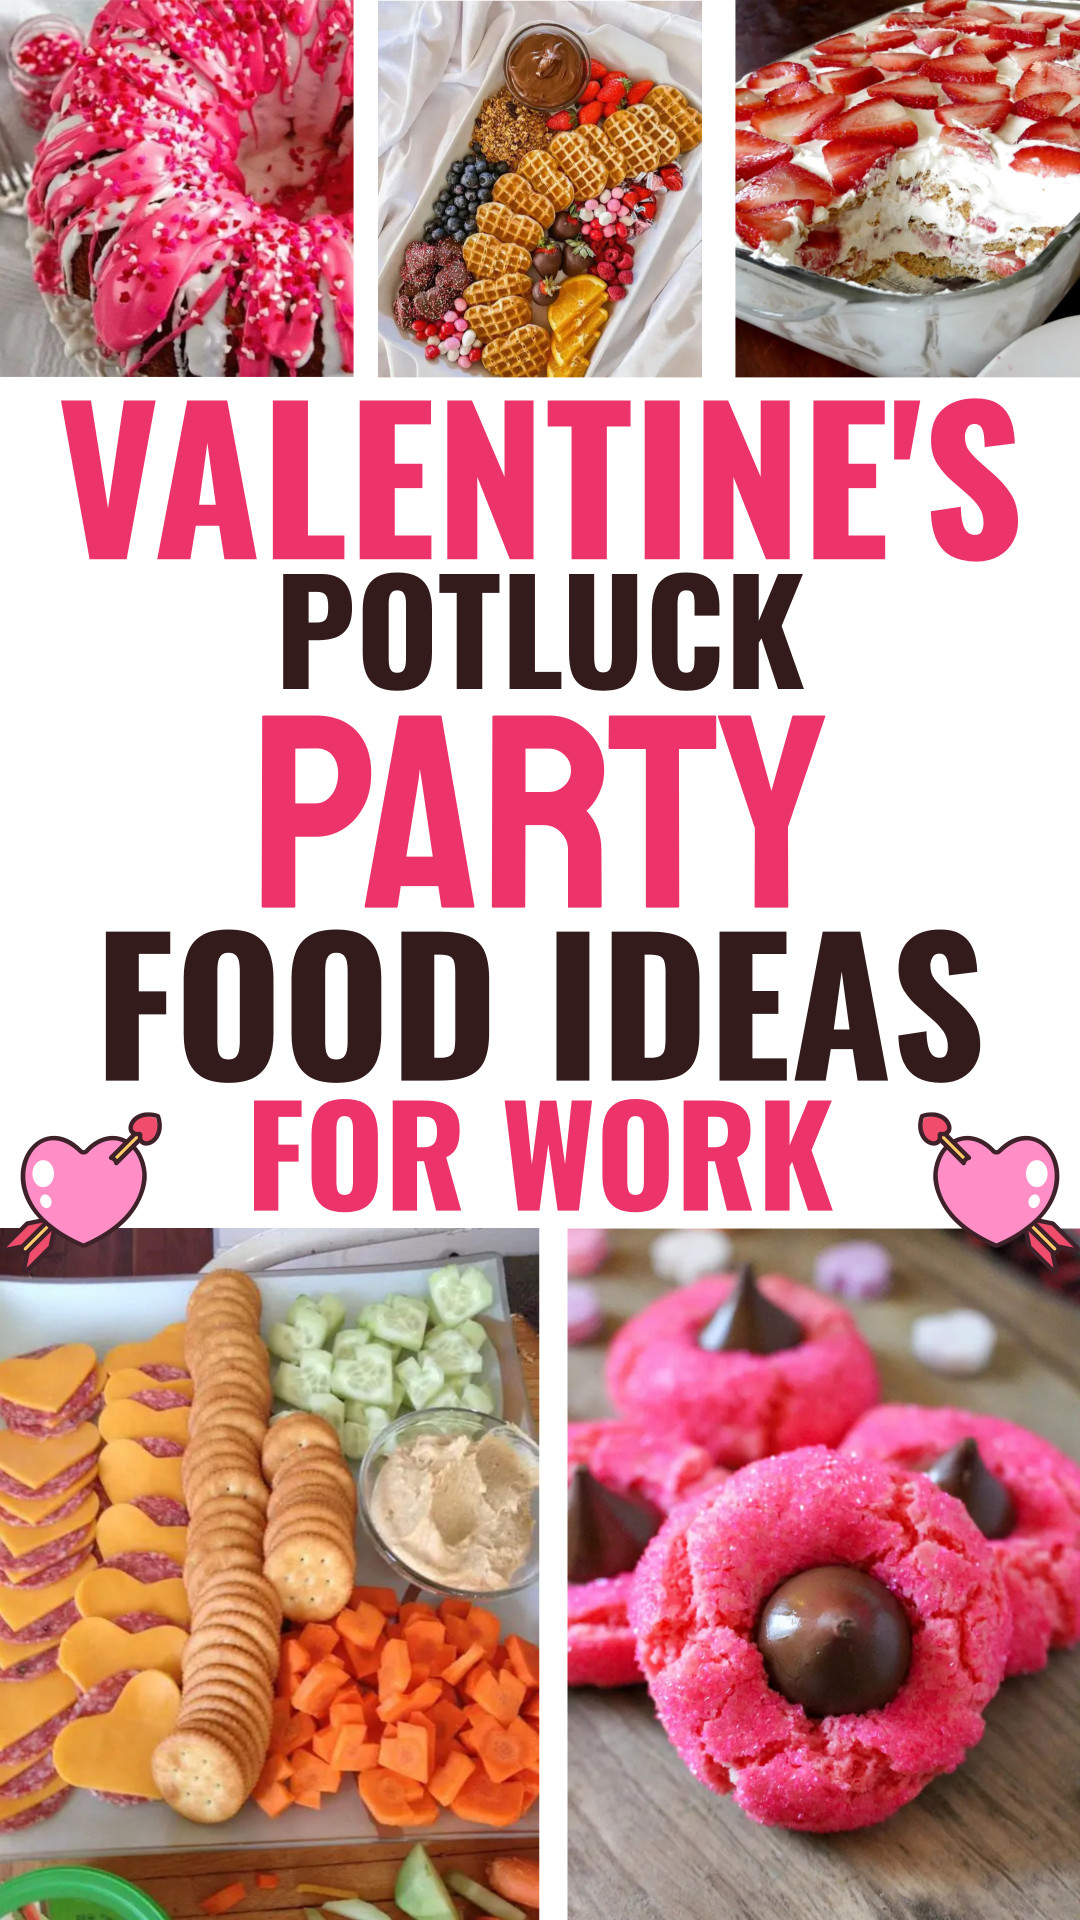 Valentine's Potluck Party Food Ideas For Work